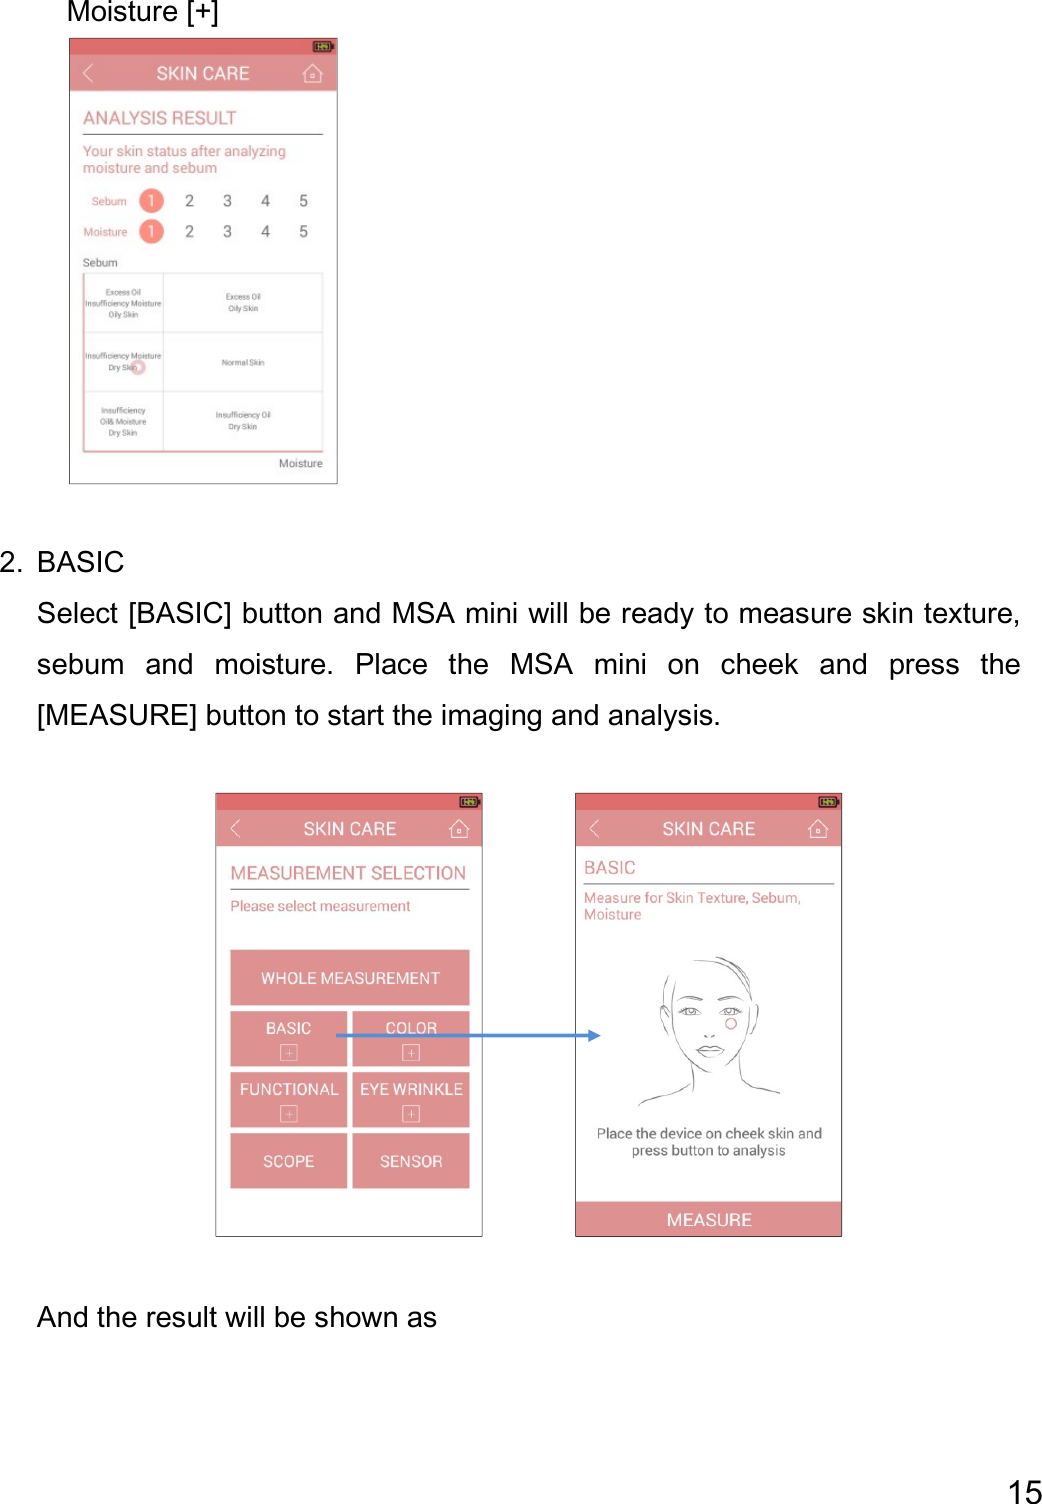  15      Moisture [+]   2. BASIC   Select [BASIC] button and MSA mini will be ready to measure skin texture, sebum  and  moisture.  Place  the  MSA  mini  on  cheek  and  press  the [MEASURE] button to start the imaging and analysis.           And the result will be shown as   